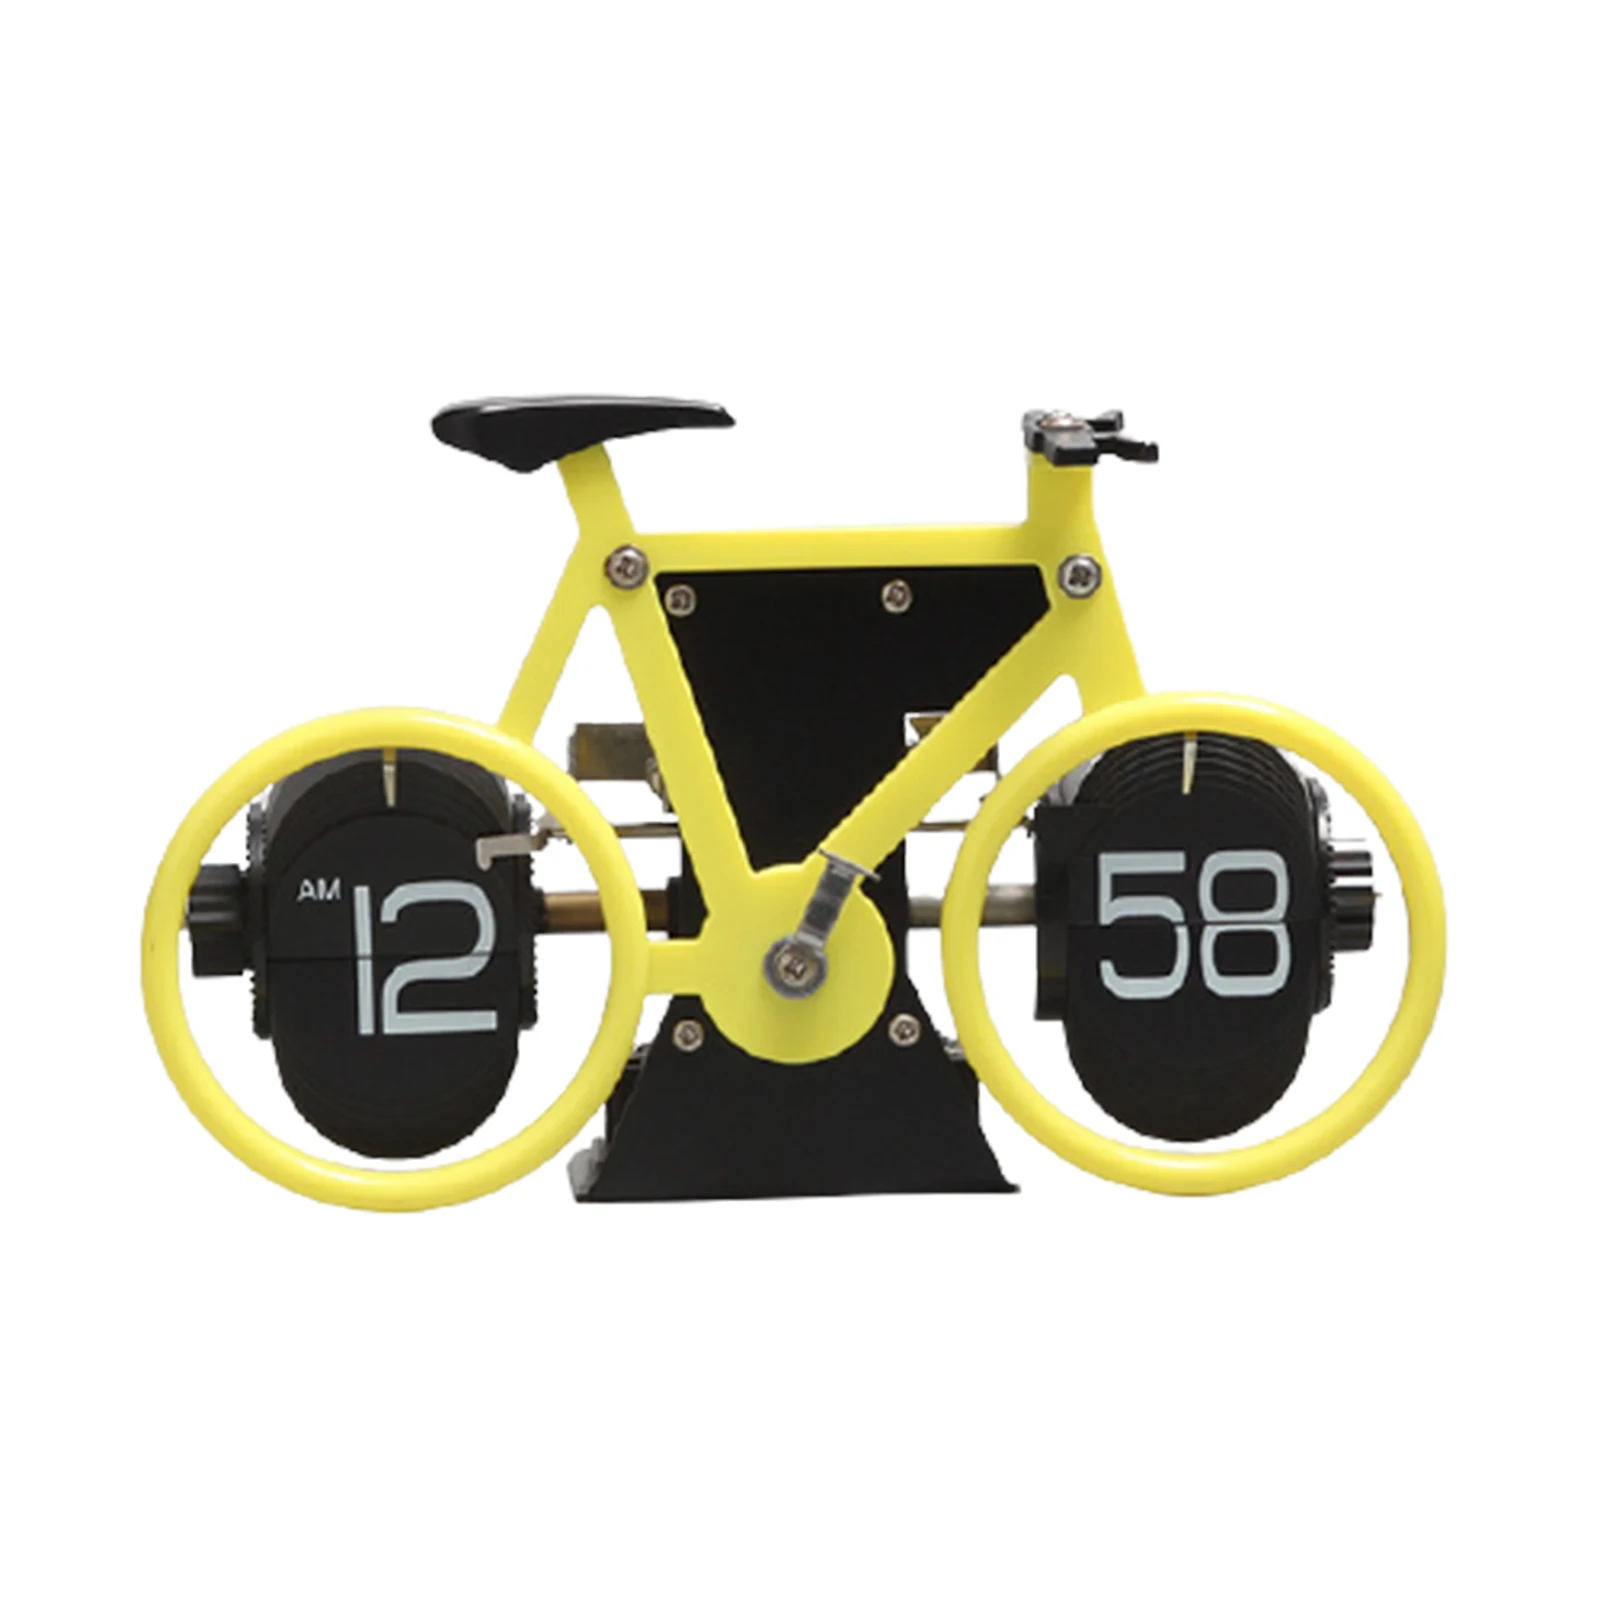 

Flip Clock Bicycle Shaped Retro Flip Down Clock 12 Hour AM/PM Show Big Number Clock For HomeOffice Decor